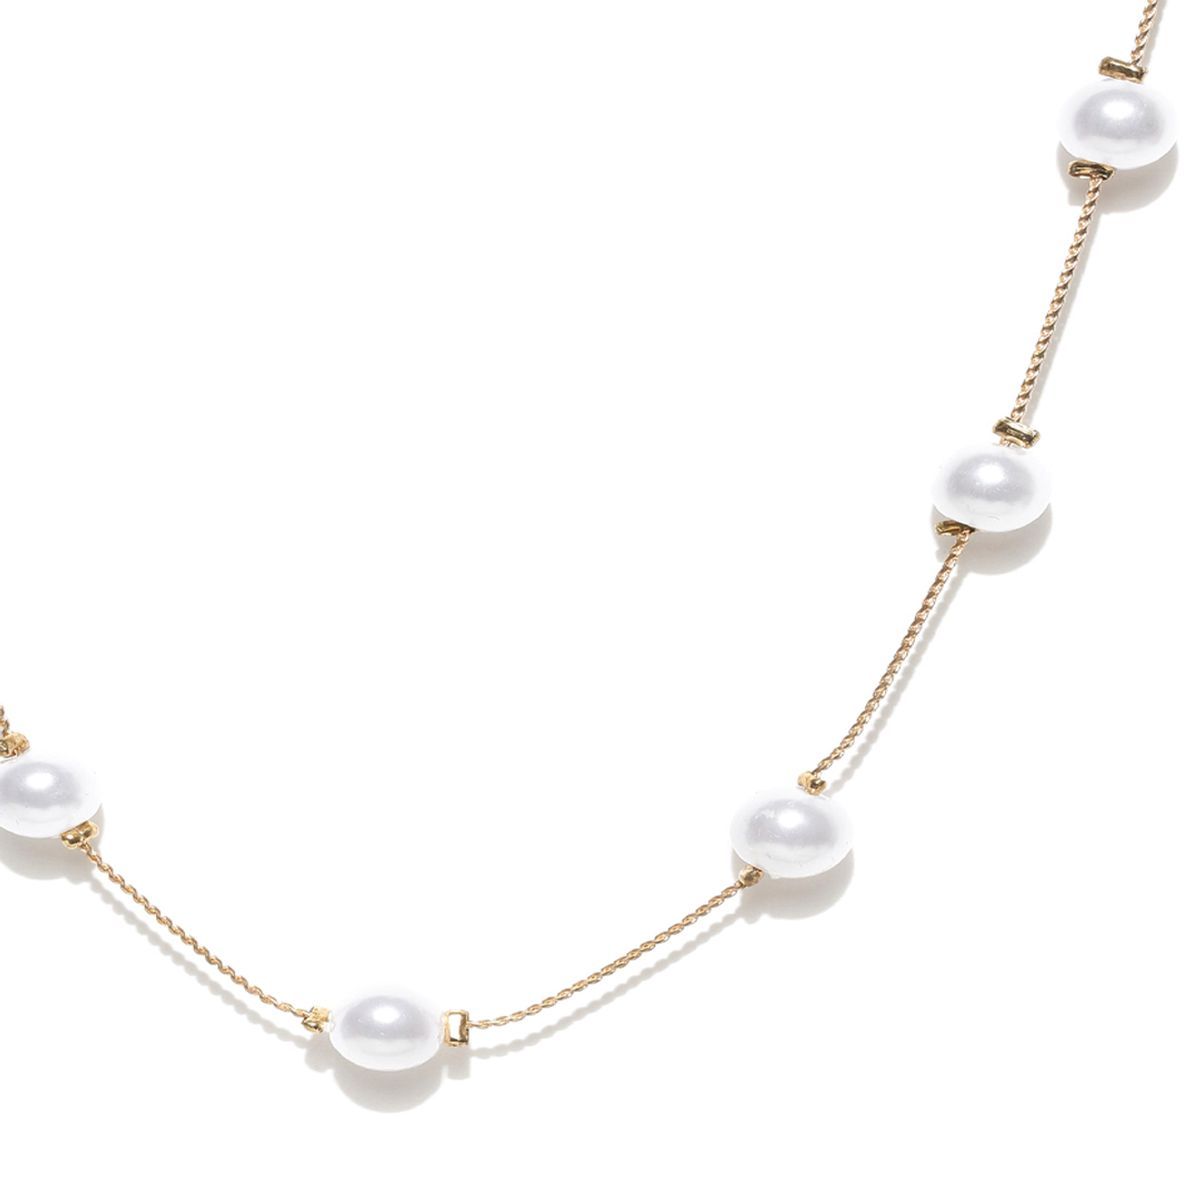 Golden white pearl necklace choker set with earrings for wedding party